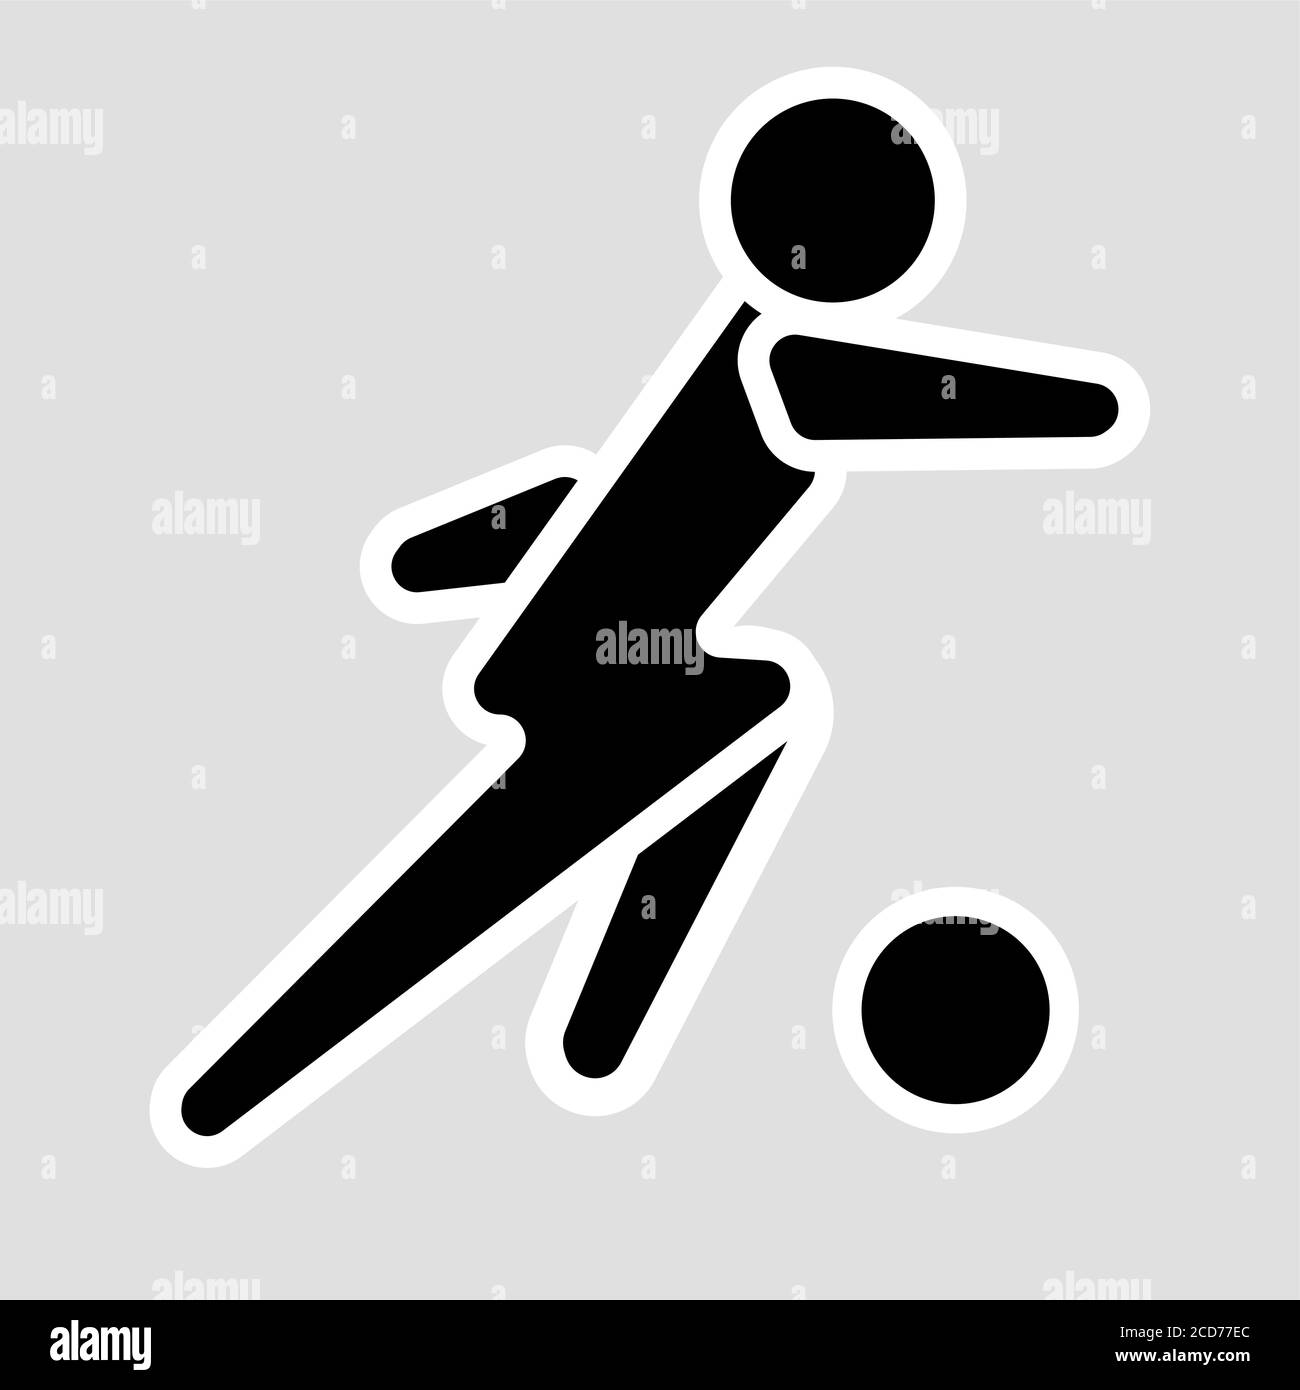 Soccer player solid vector icon. Flat design illustration Stock Vector